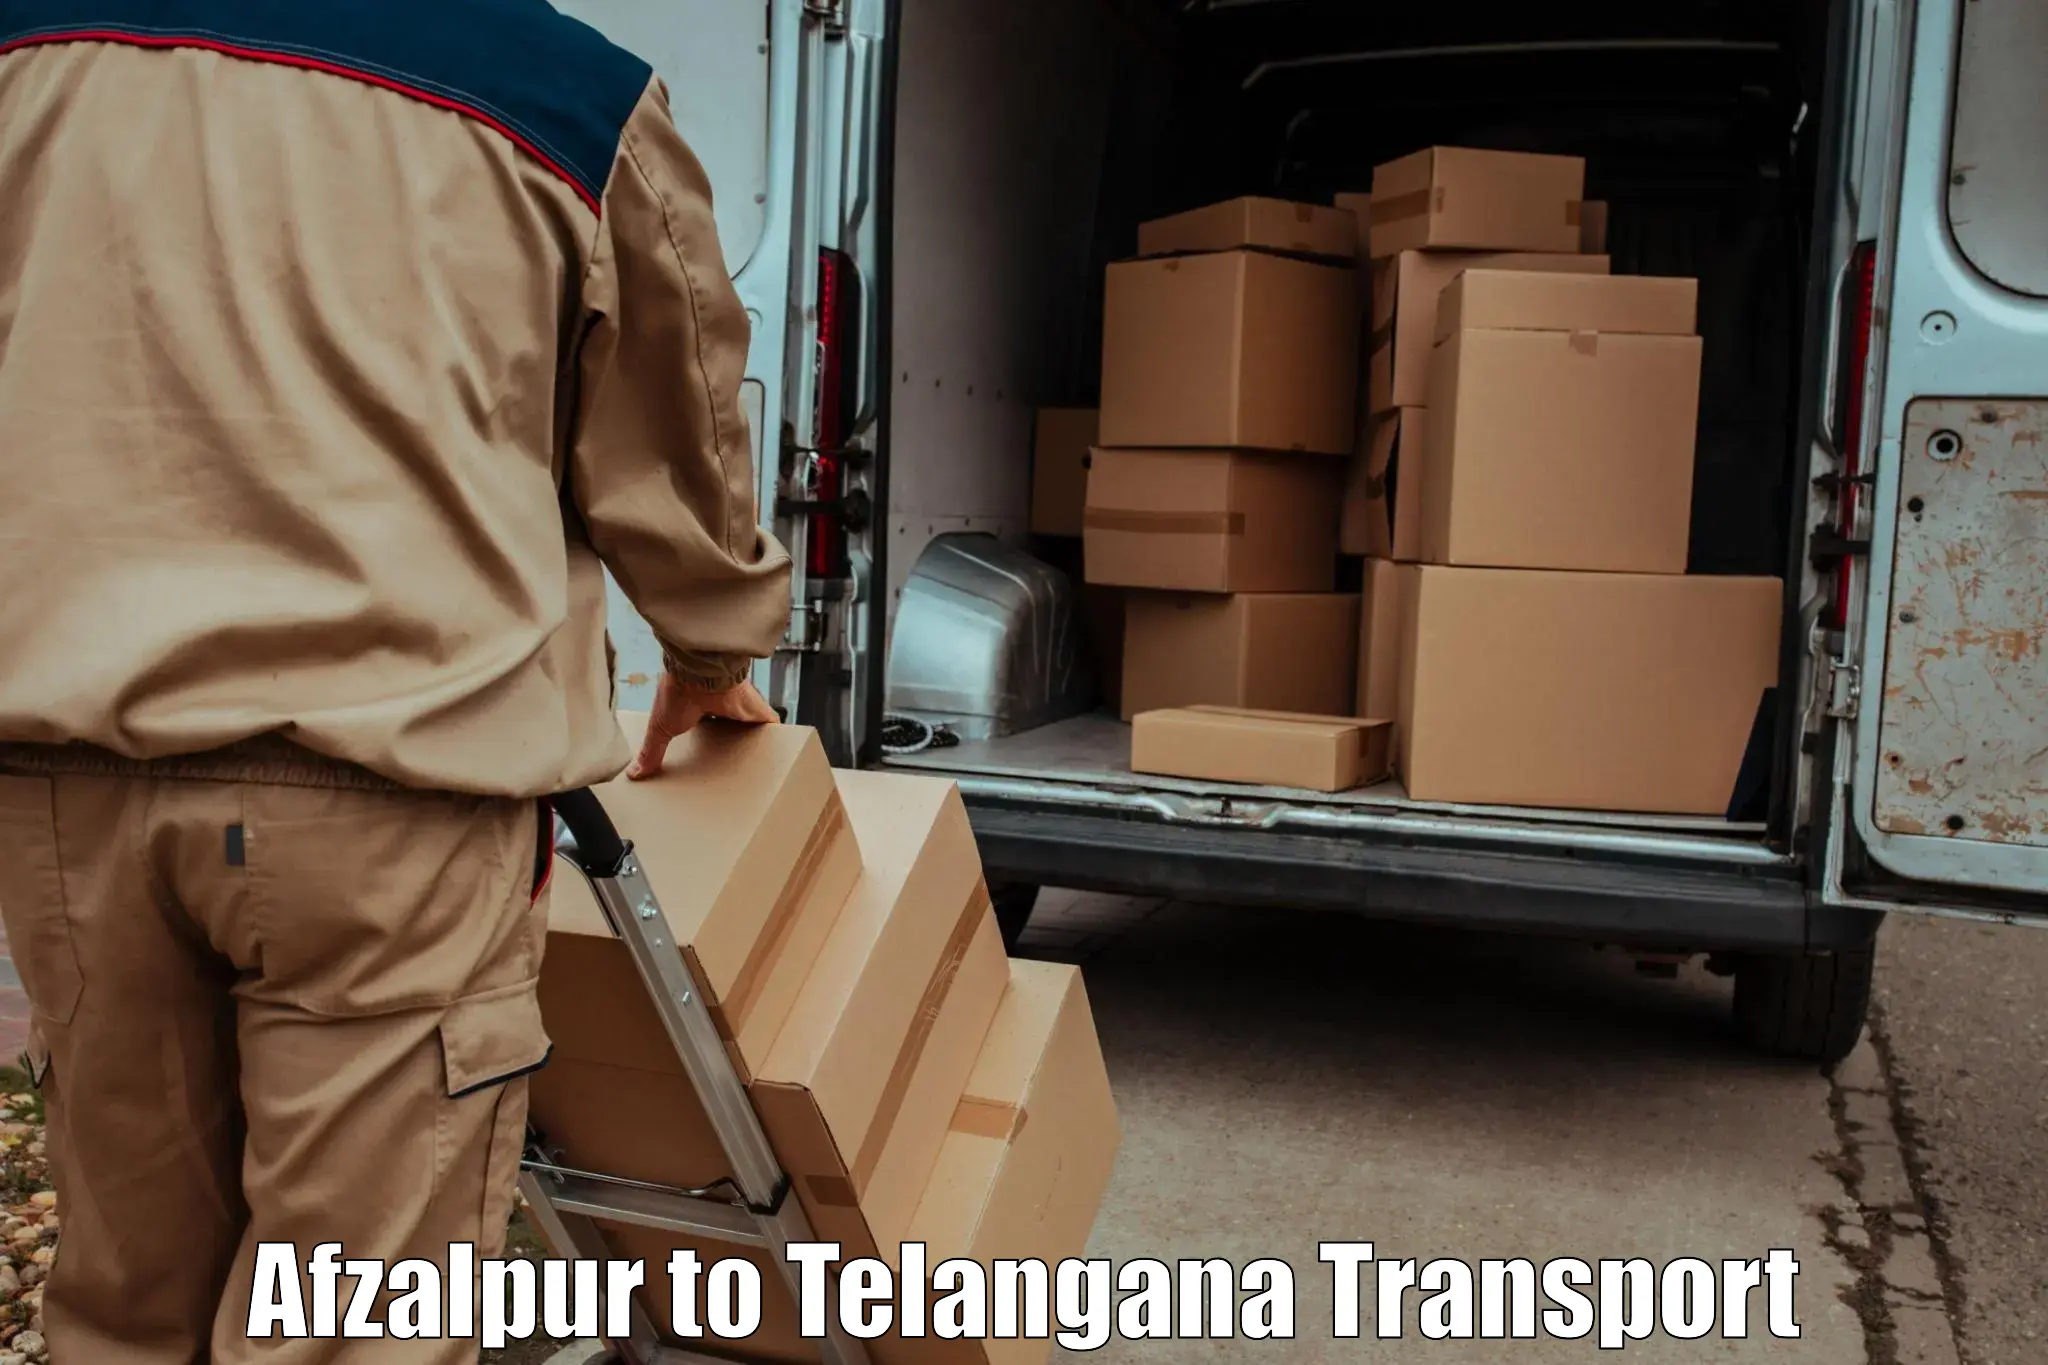 Pick up transport service Afzalpur to Secunderabad